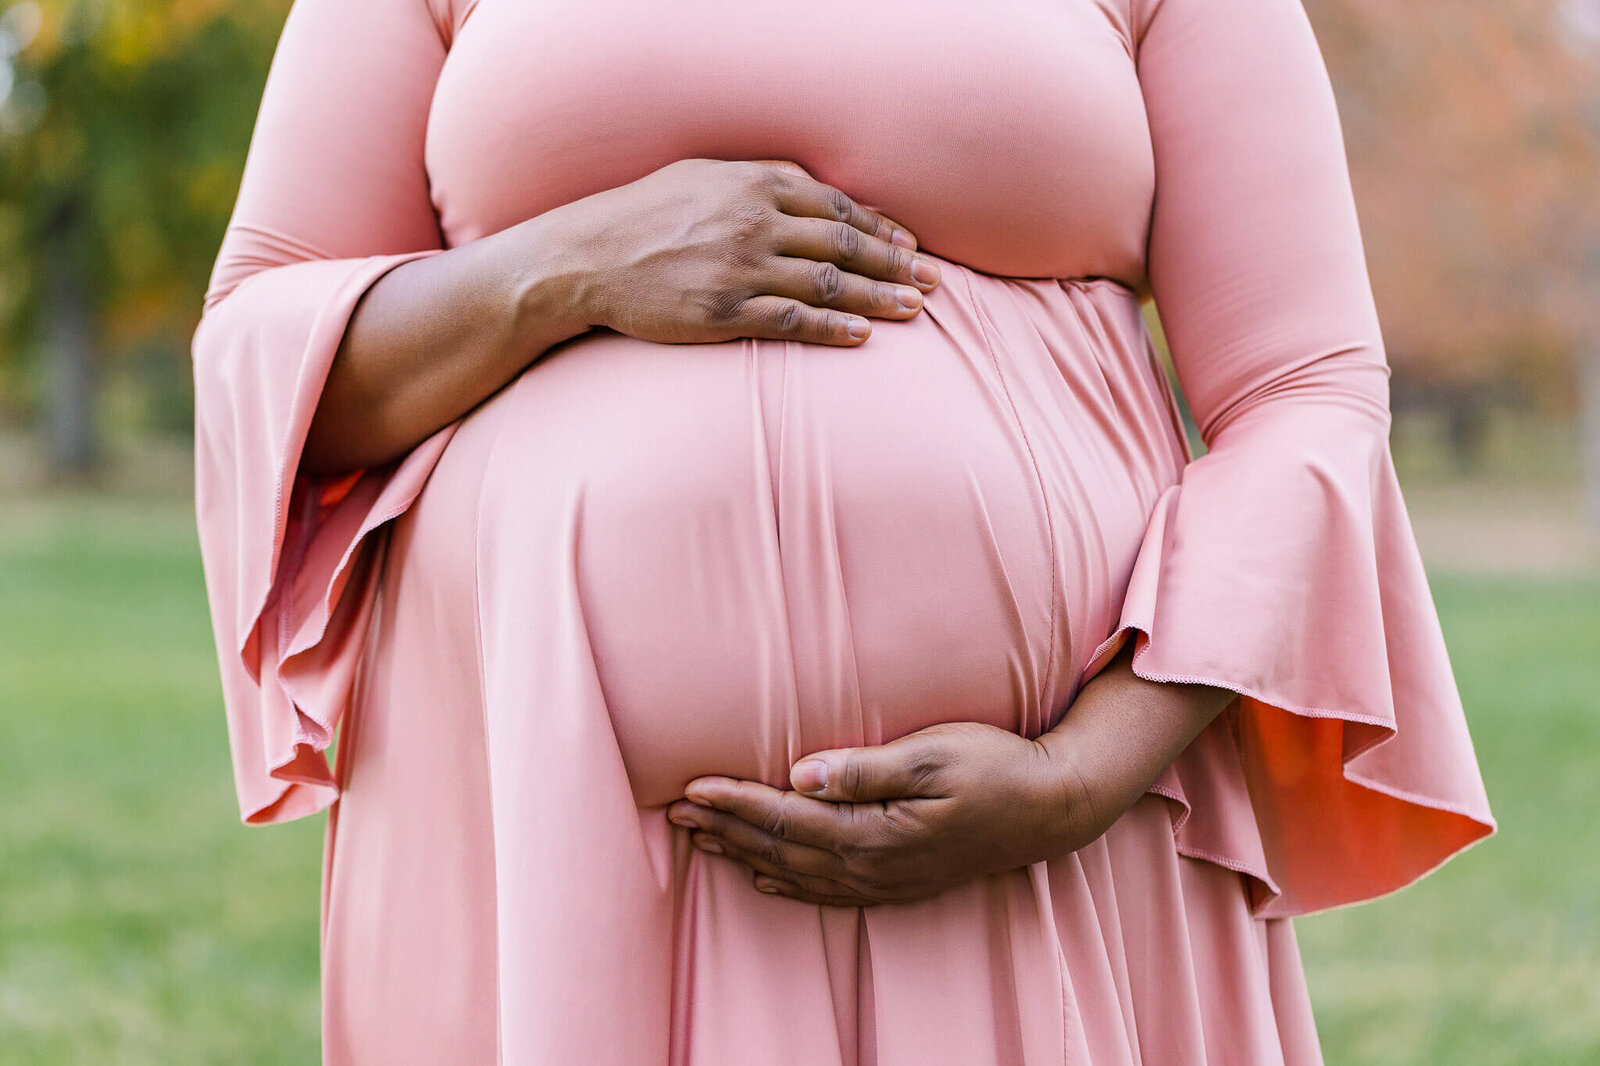 A close-up of a pregnant woman's belly in a pink dress.